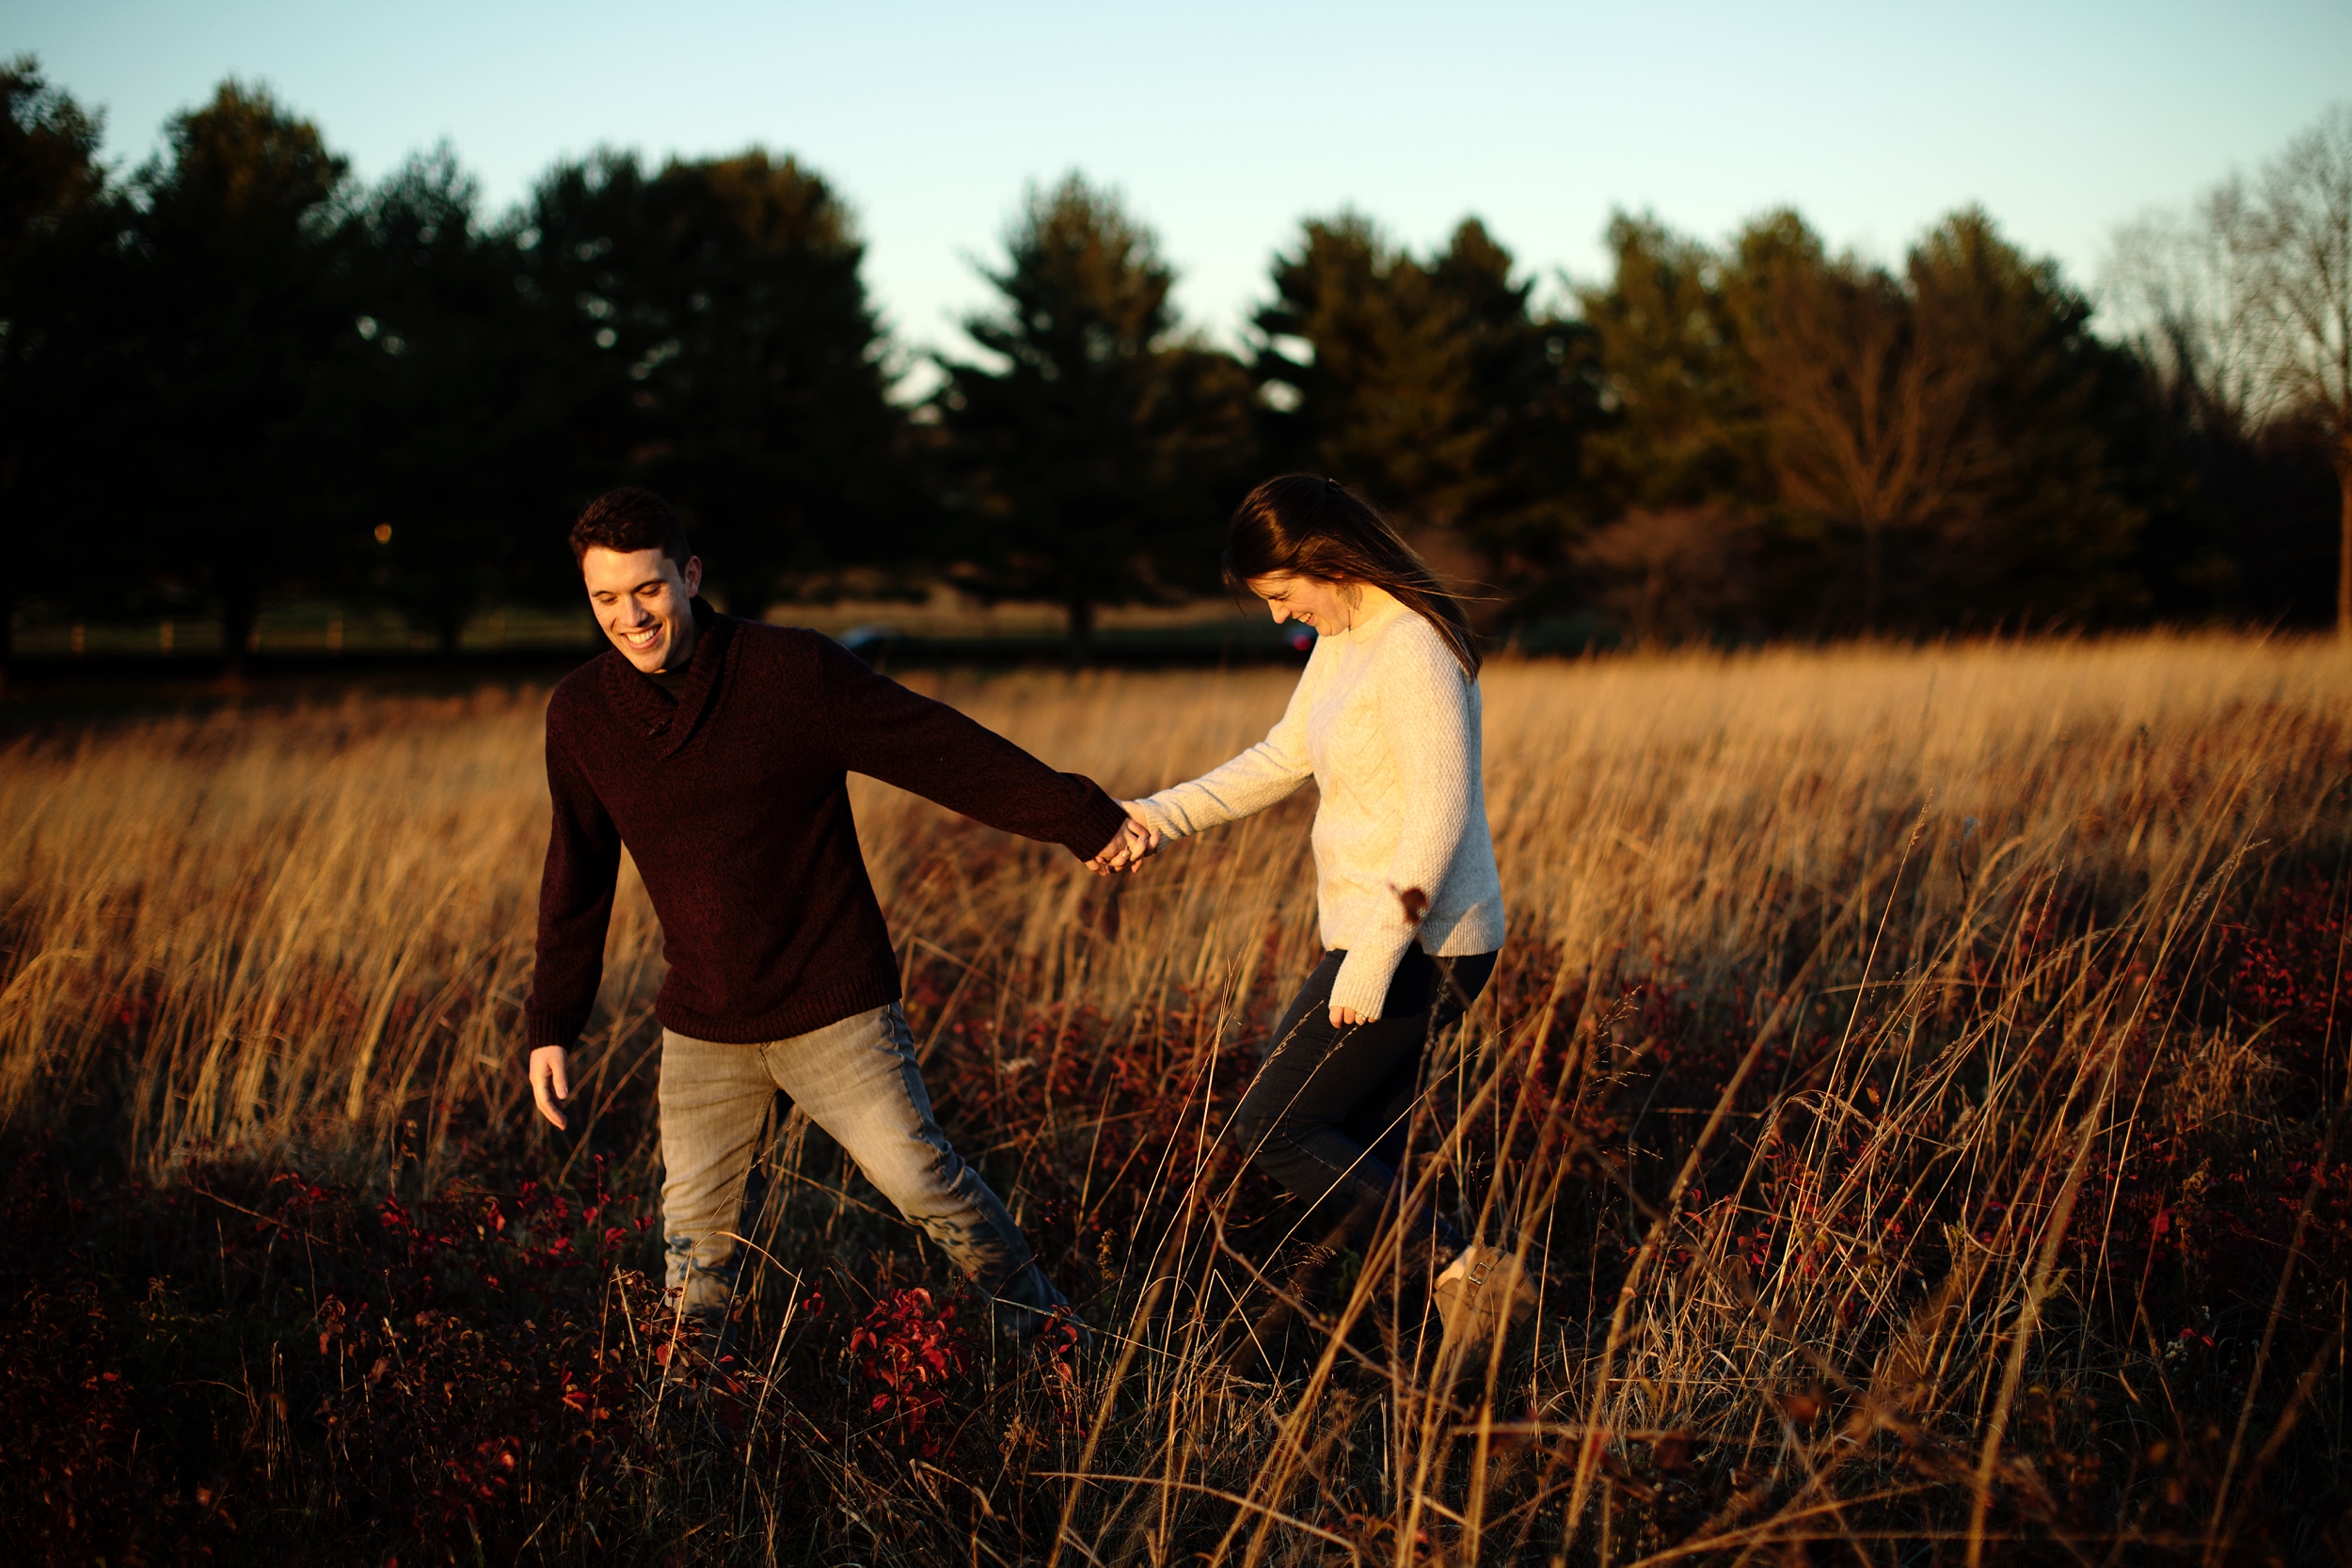 Wilmington Delaware Engagement Photographers in late fall at golden hour taken by Janae Rose Photography, East Coast Based Destination Wedding Photographers